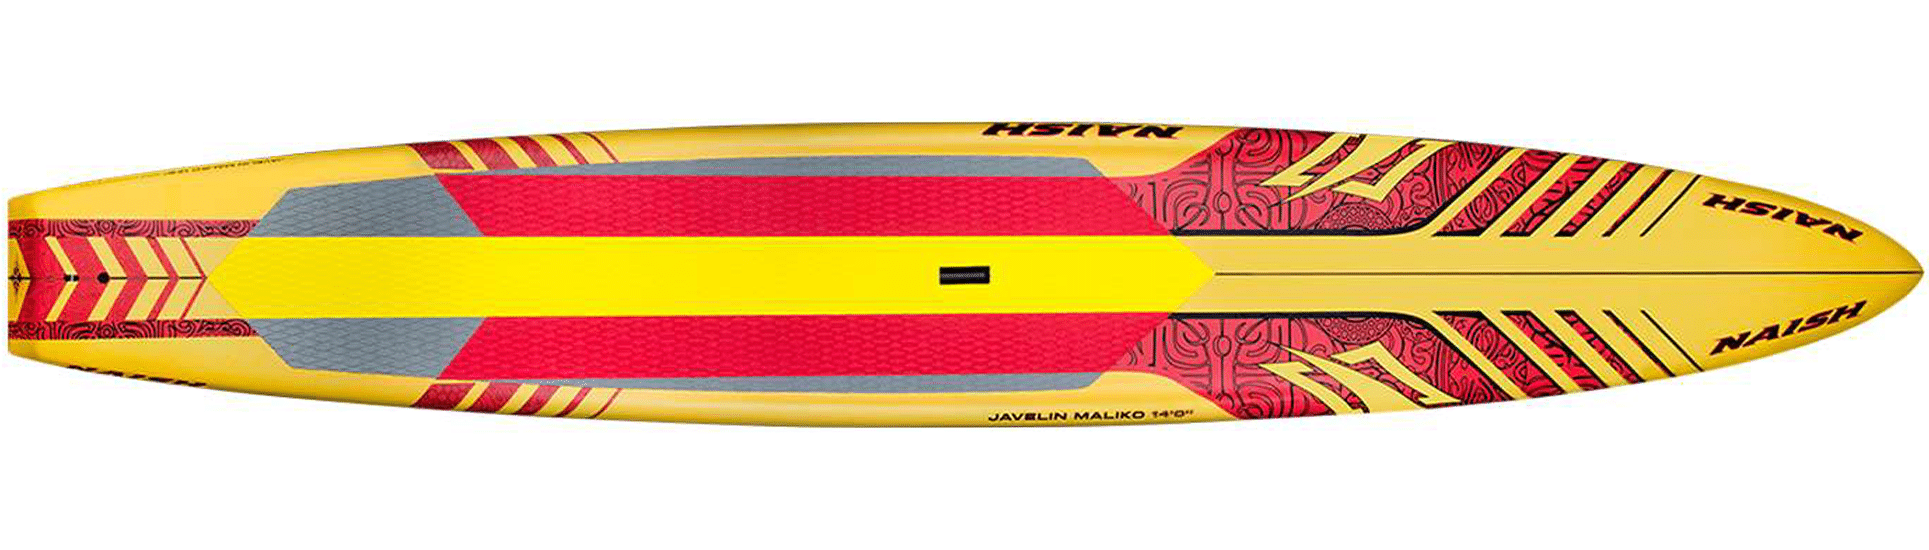 Naish Brand Products | Harbor Outfitters